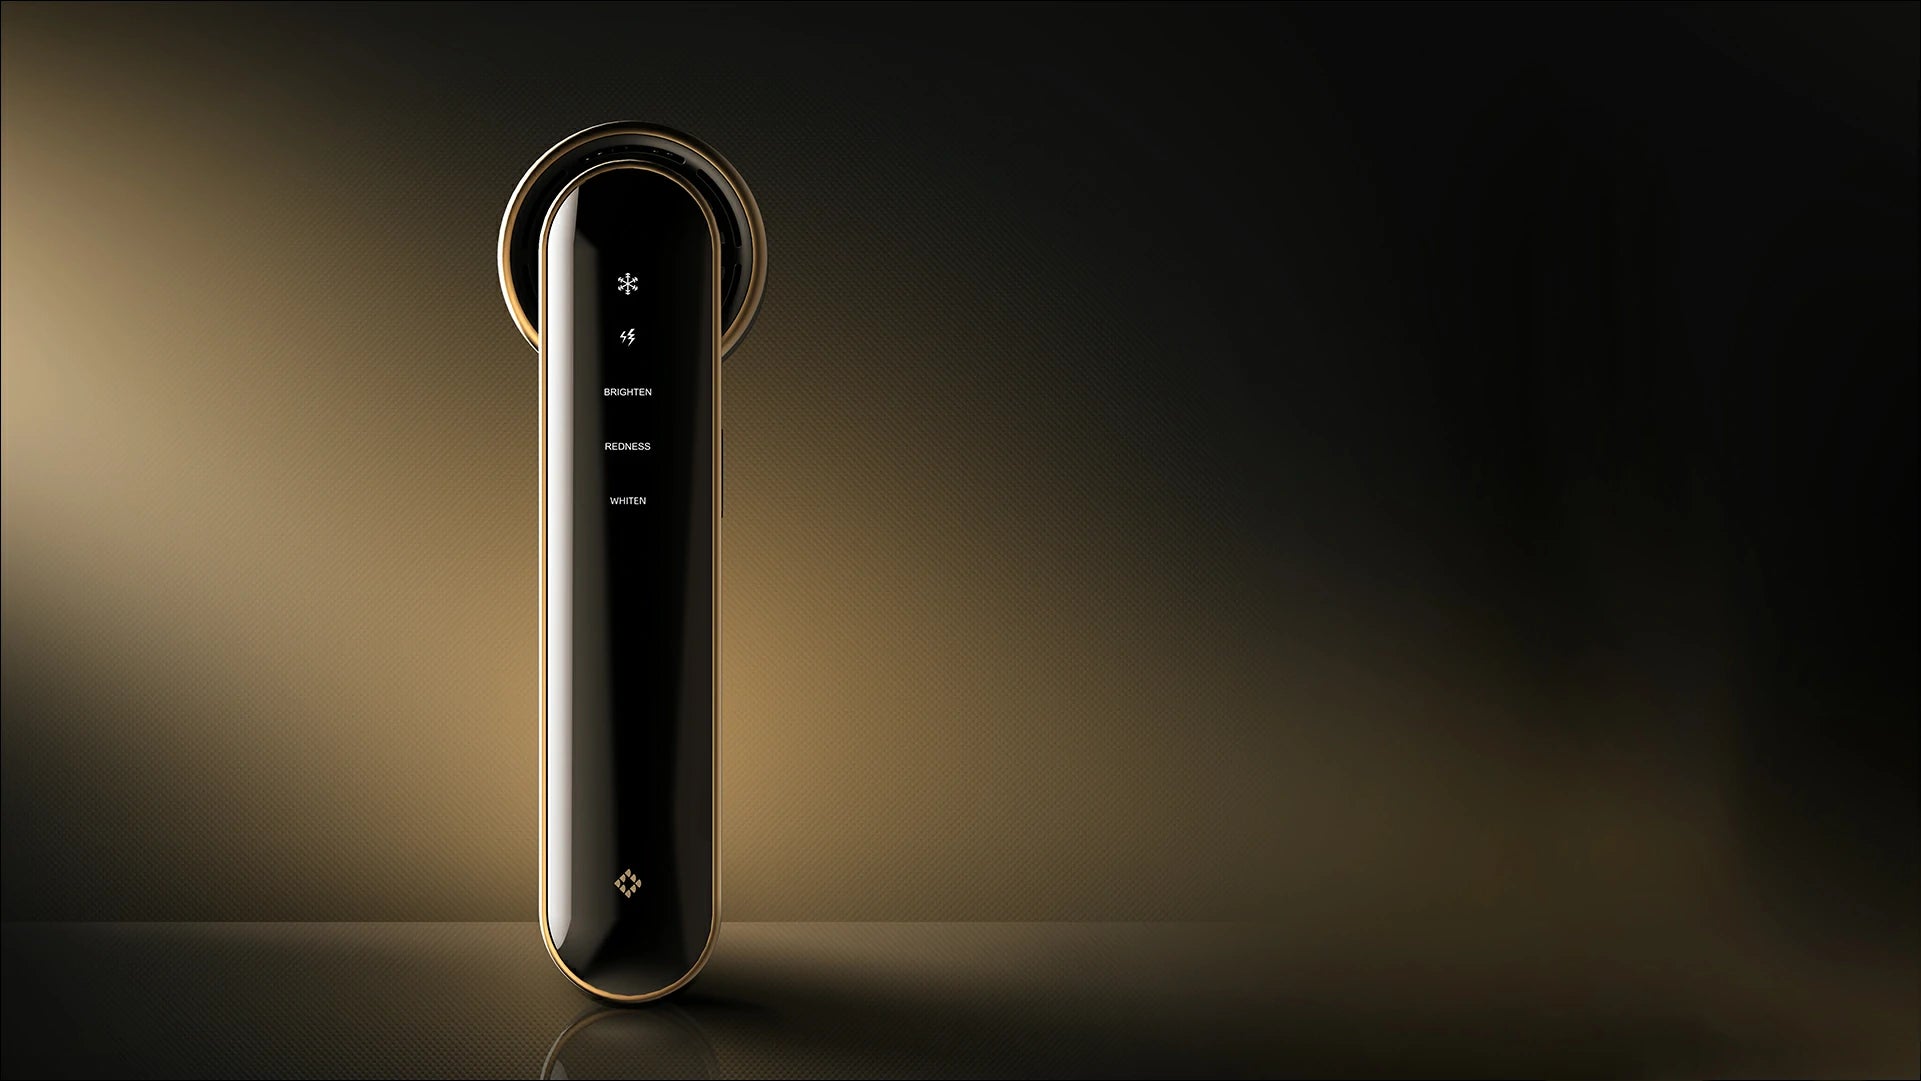 JOVS Blacken Photorejuvenation Skincare Device displayed against an elegant golden gradient background, combining beauty and advanced technology.